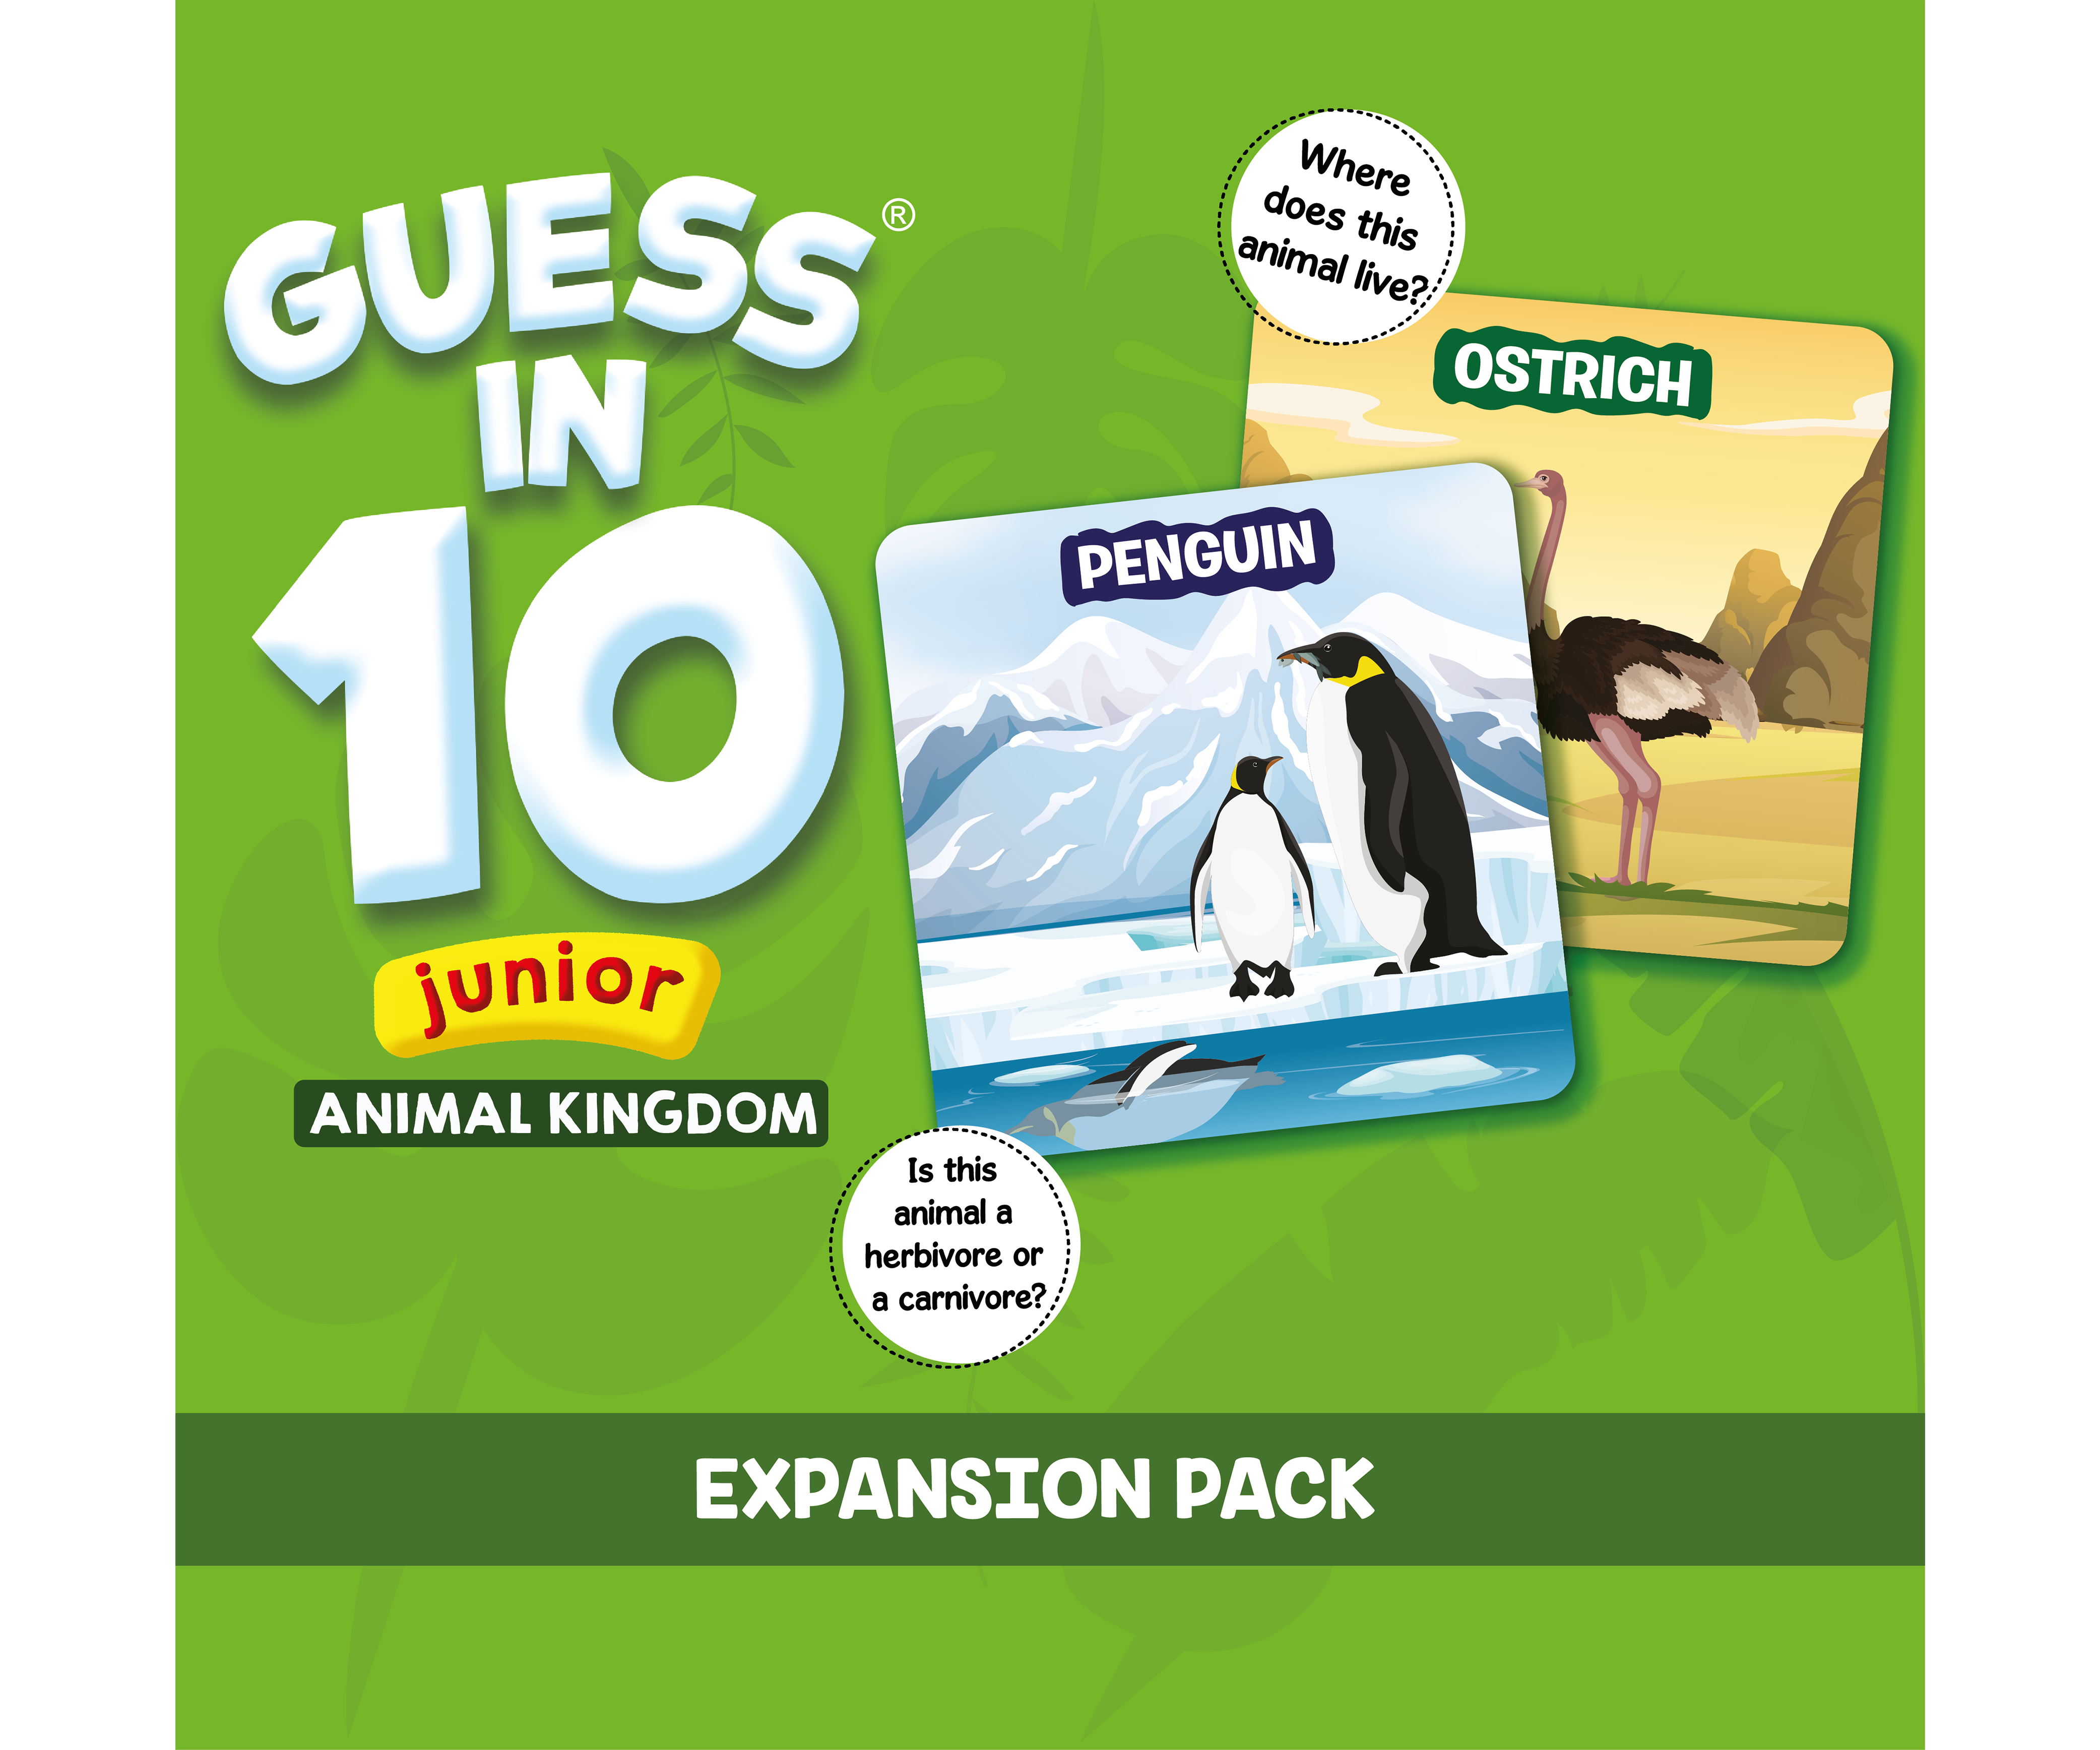 Guess in 10 Jr. Animal Kingdom - Downloadable Expansion Pack